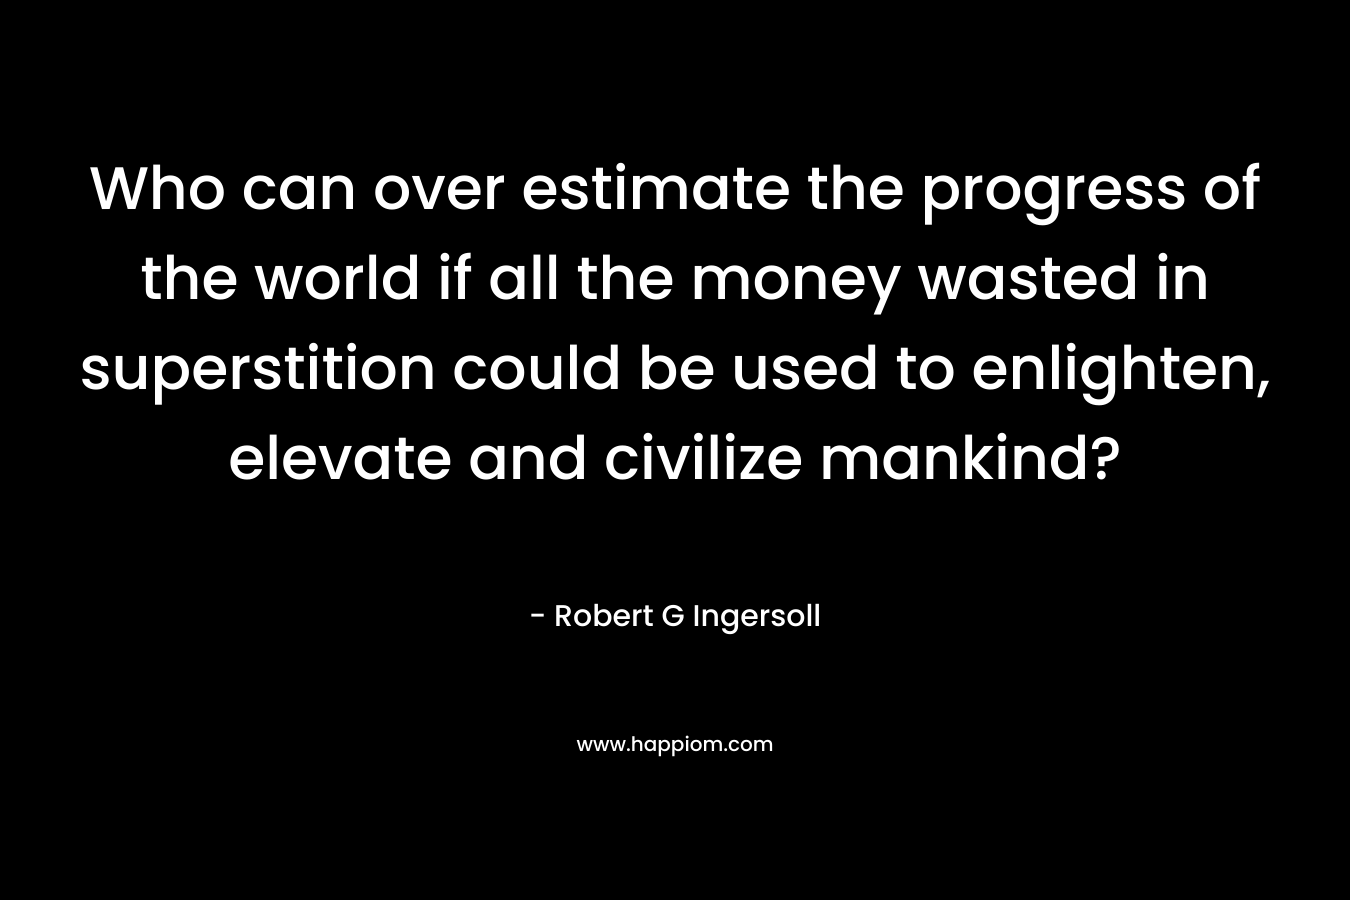 Who can over estimate the progress of the world if all the money wasted in superstition could be used to enlighten, elevate and civilize mankind?